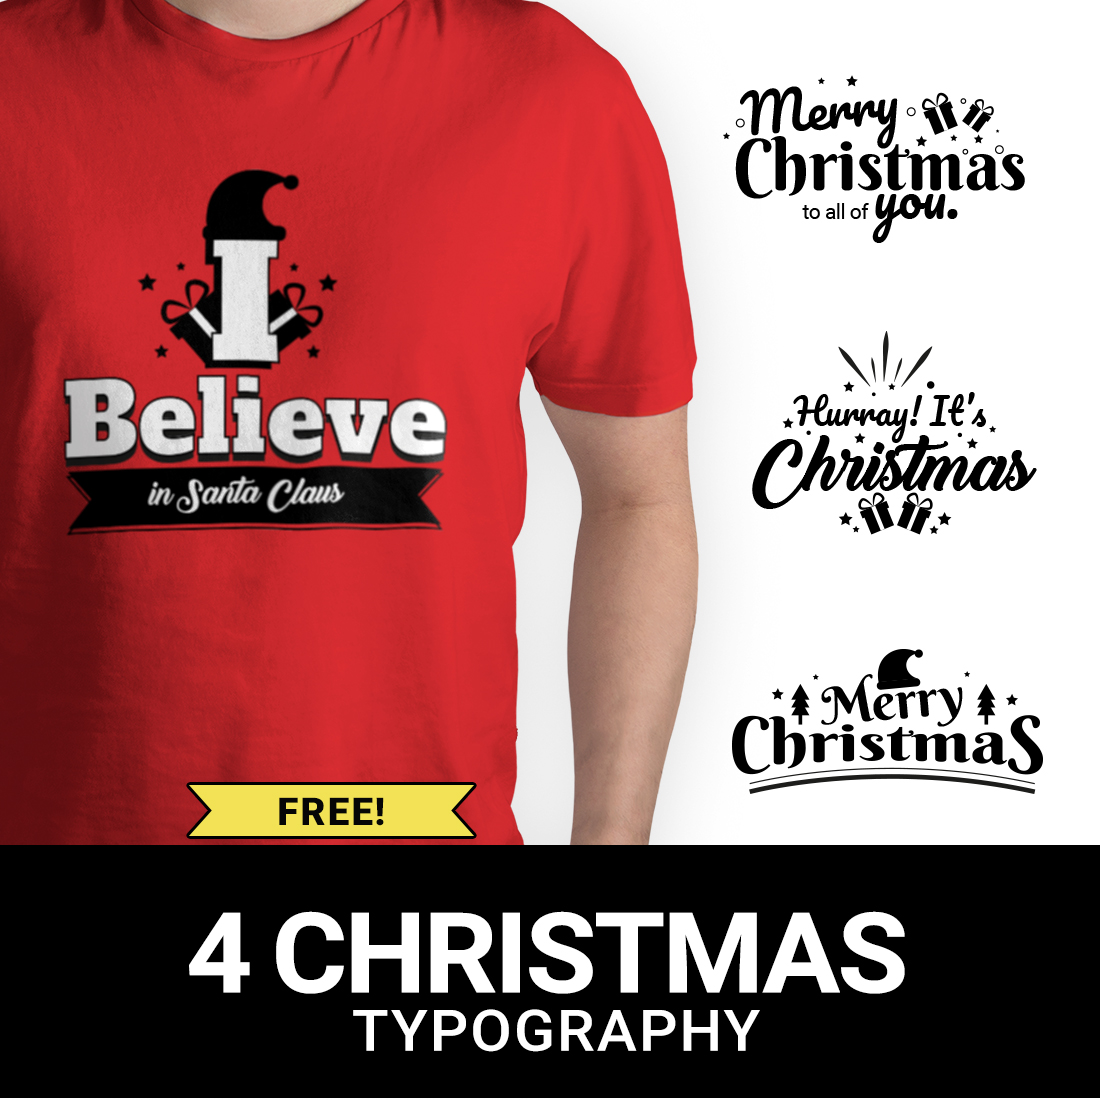 Christmas Typography Design cover image.